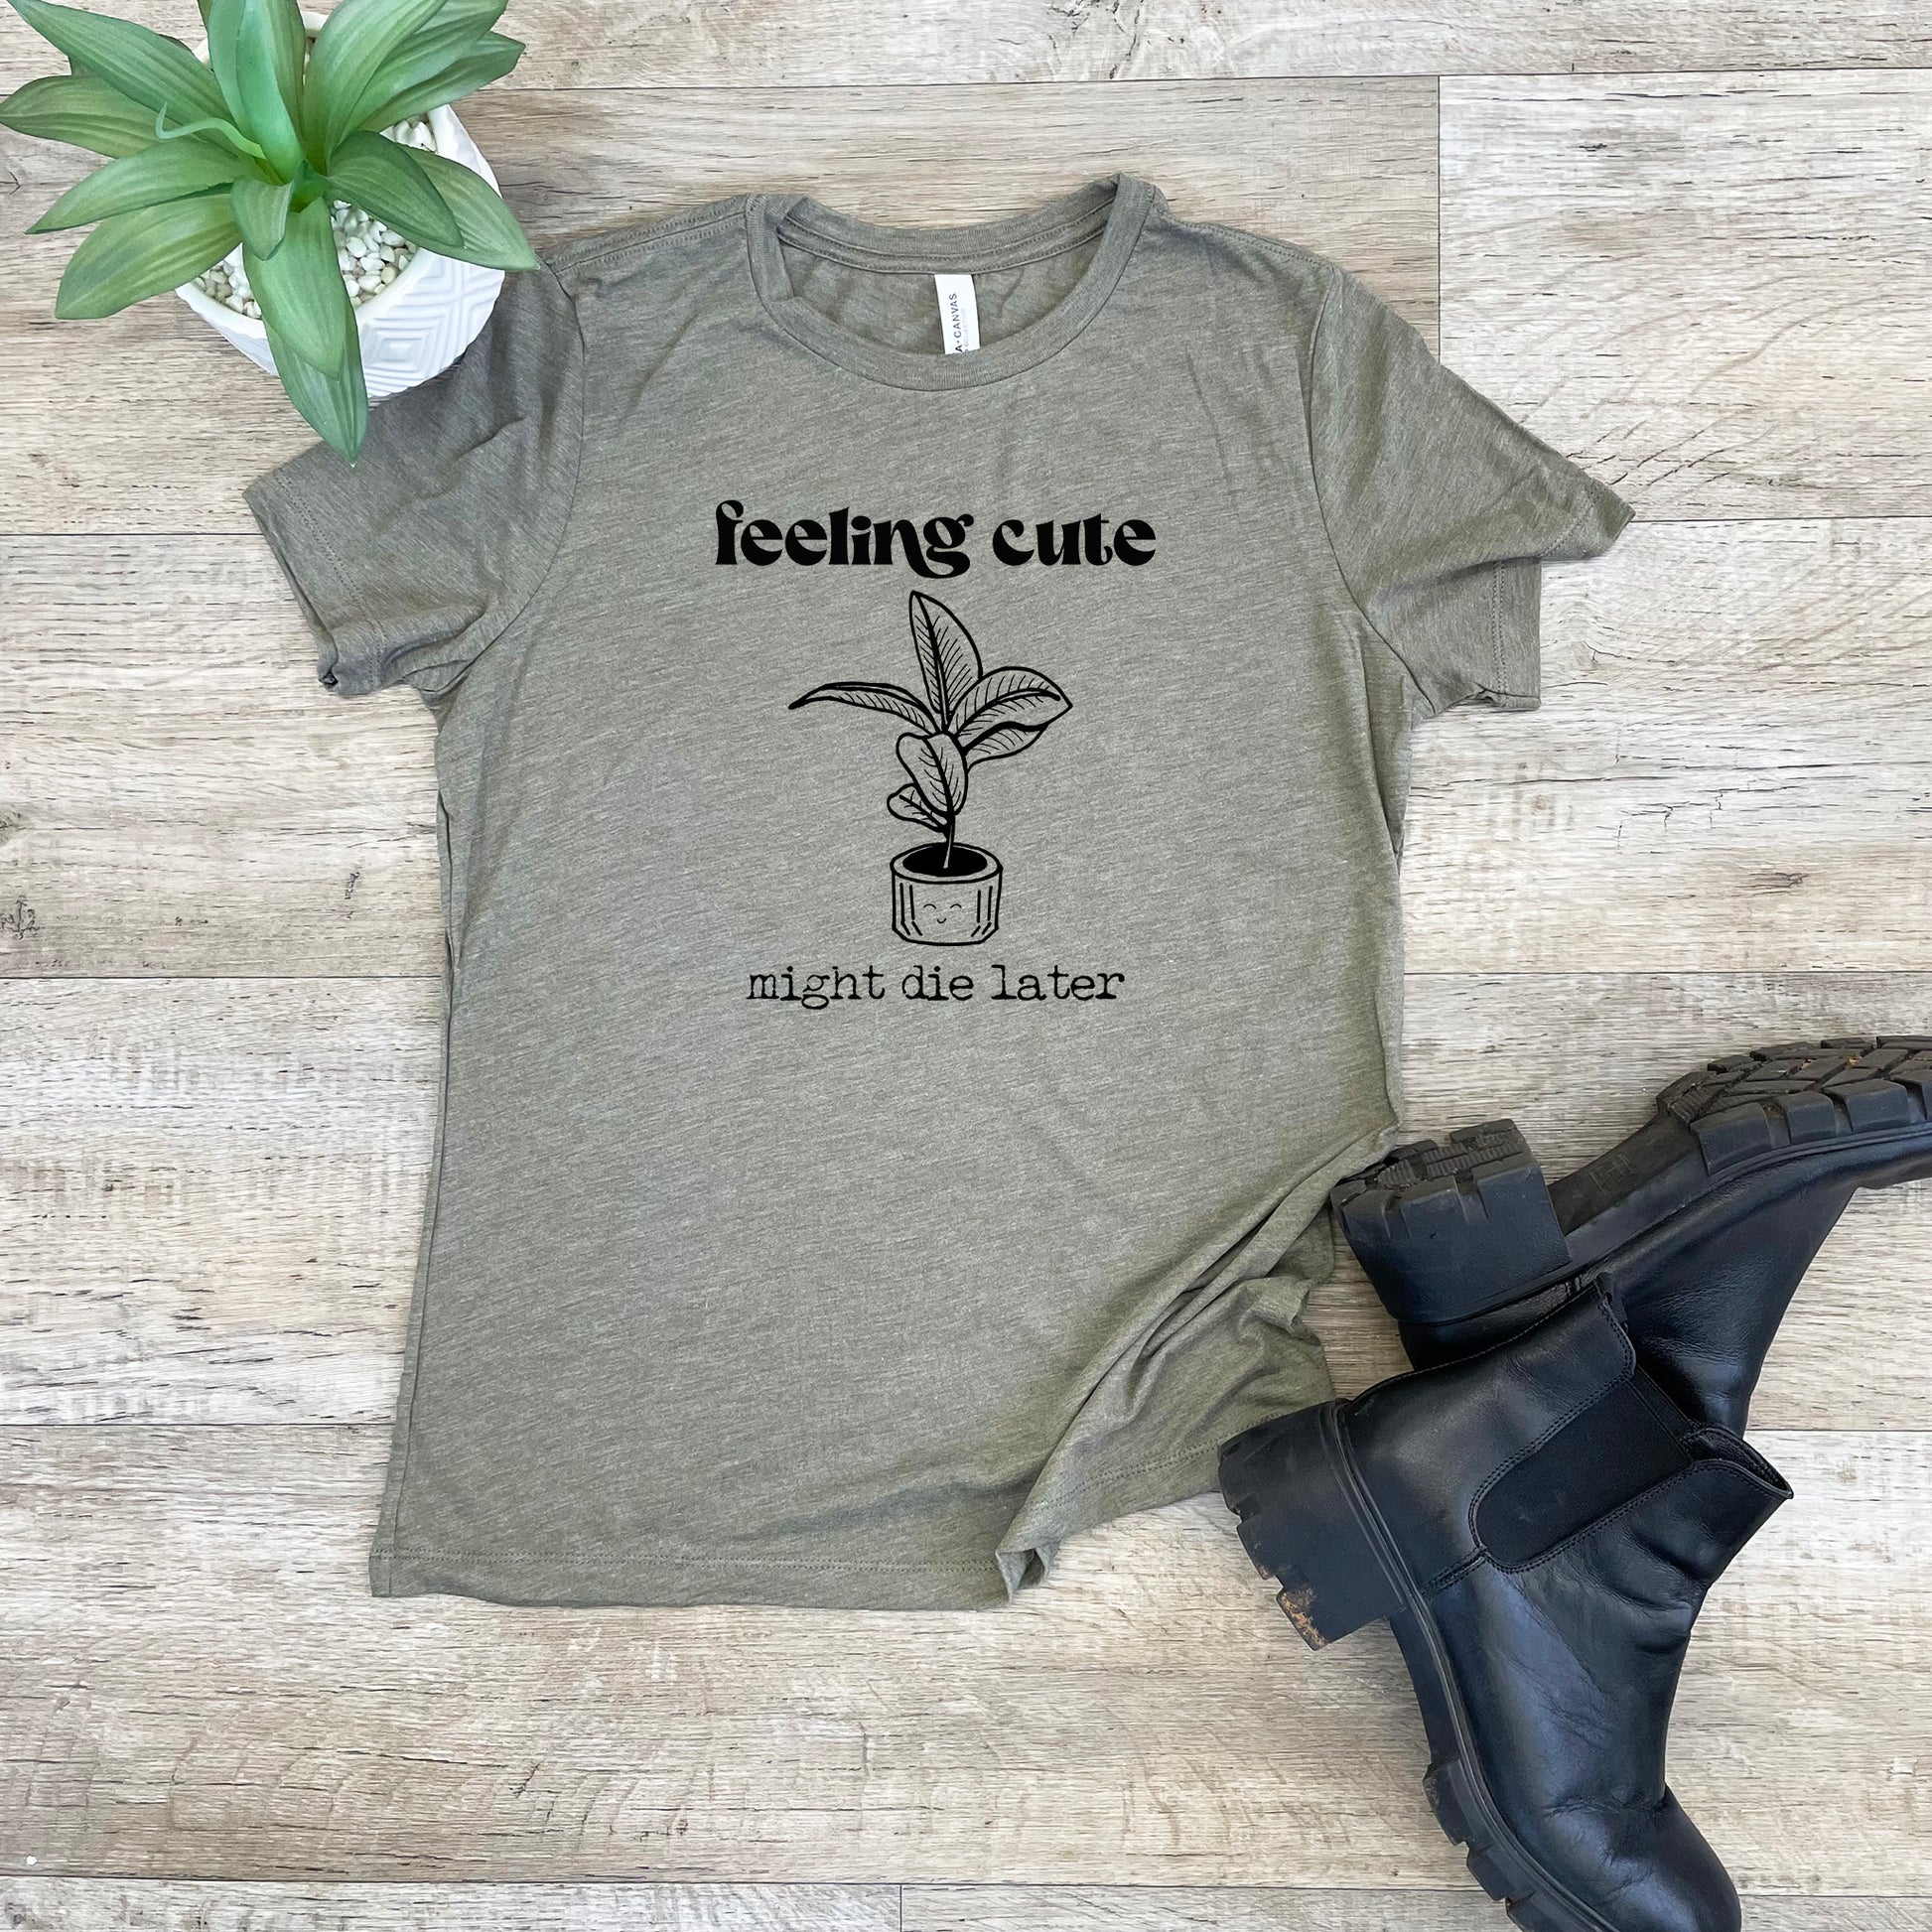 a t - shirt with a plant on it and a pair of black boots